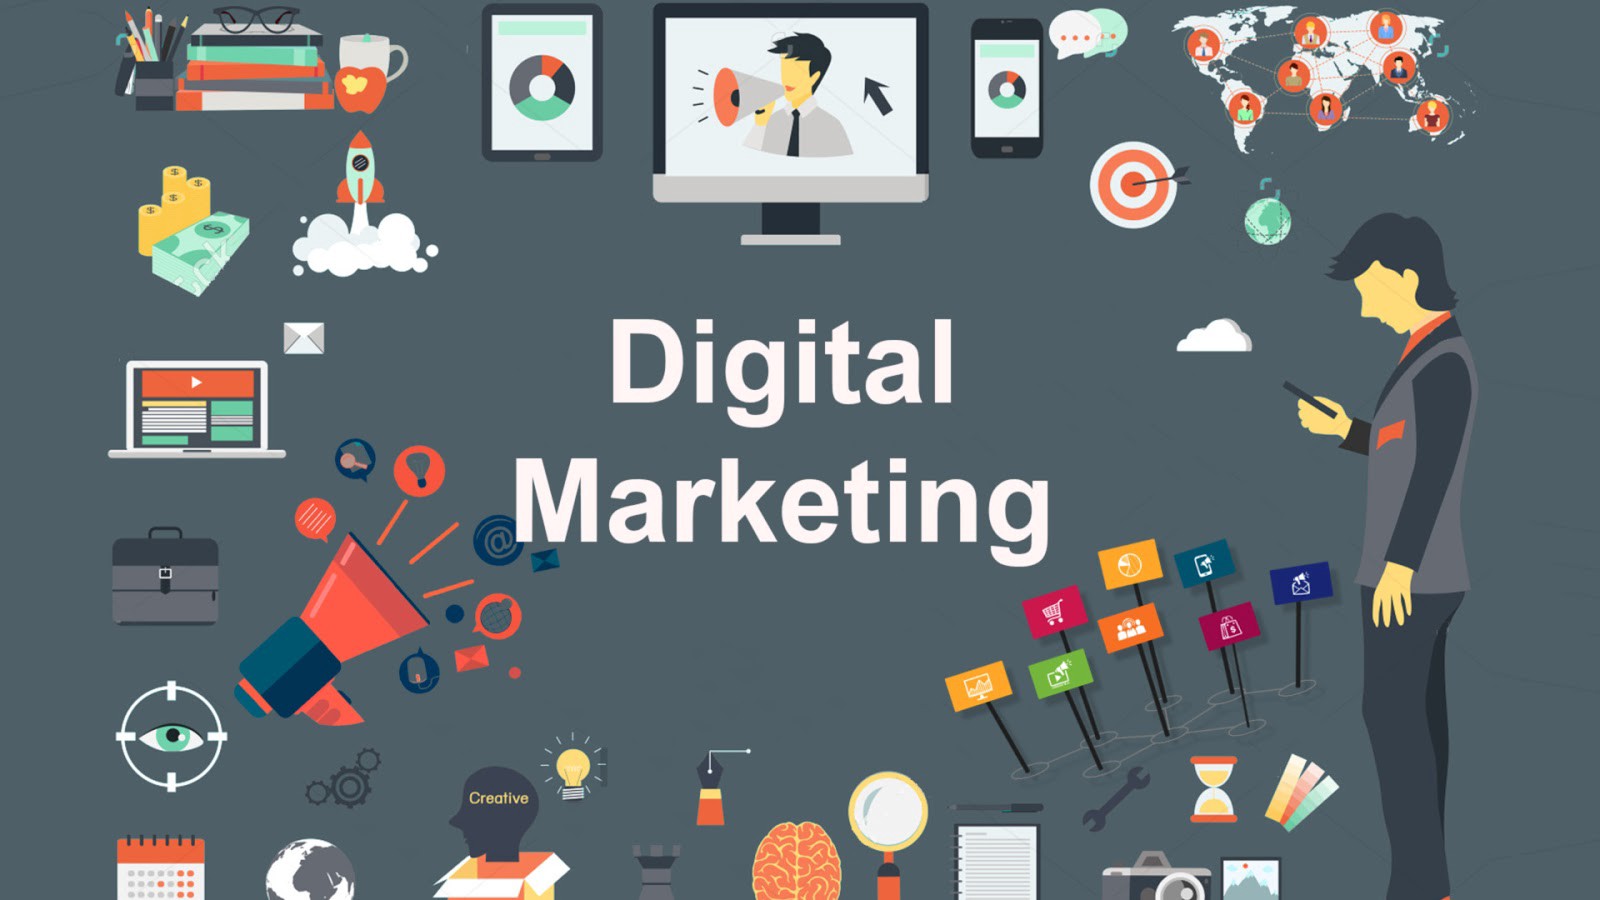 8 Digital Marketing Trends to Watch for in 2022